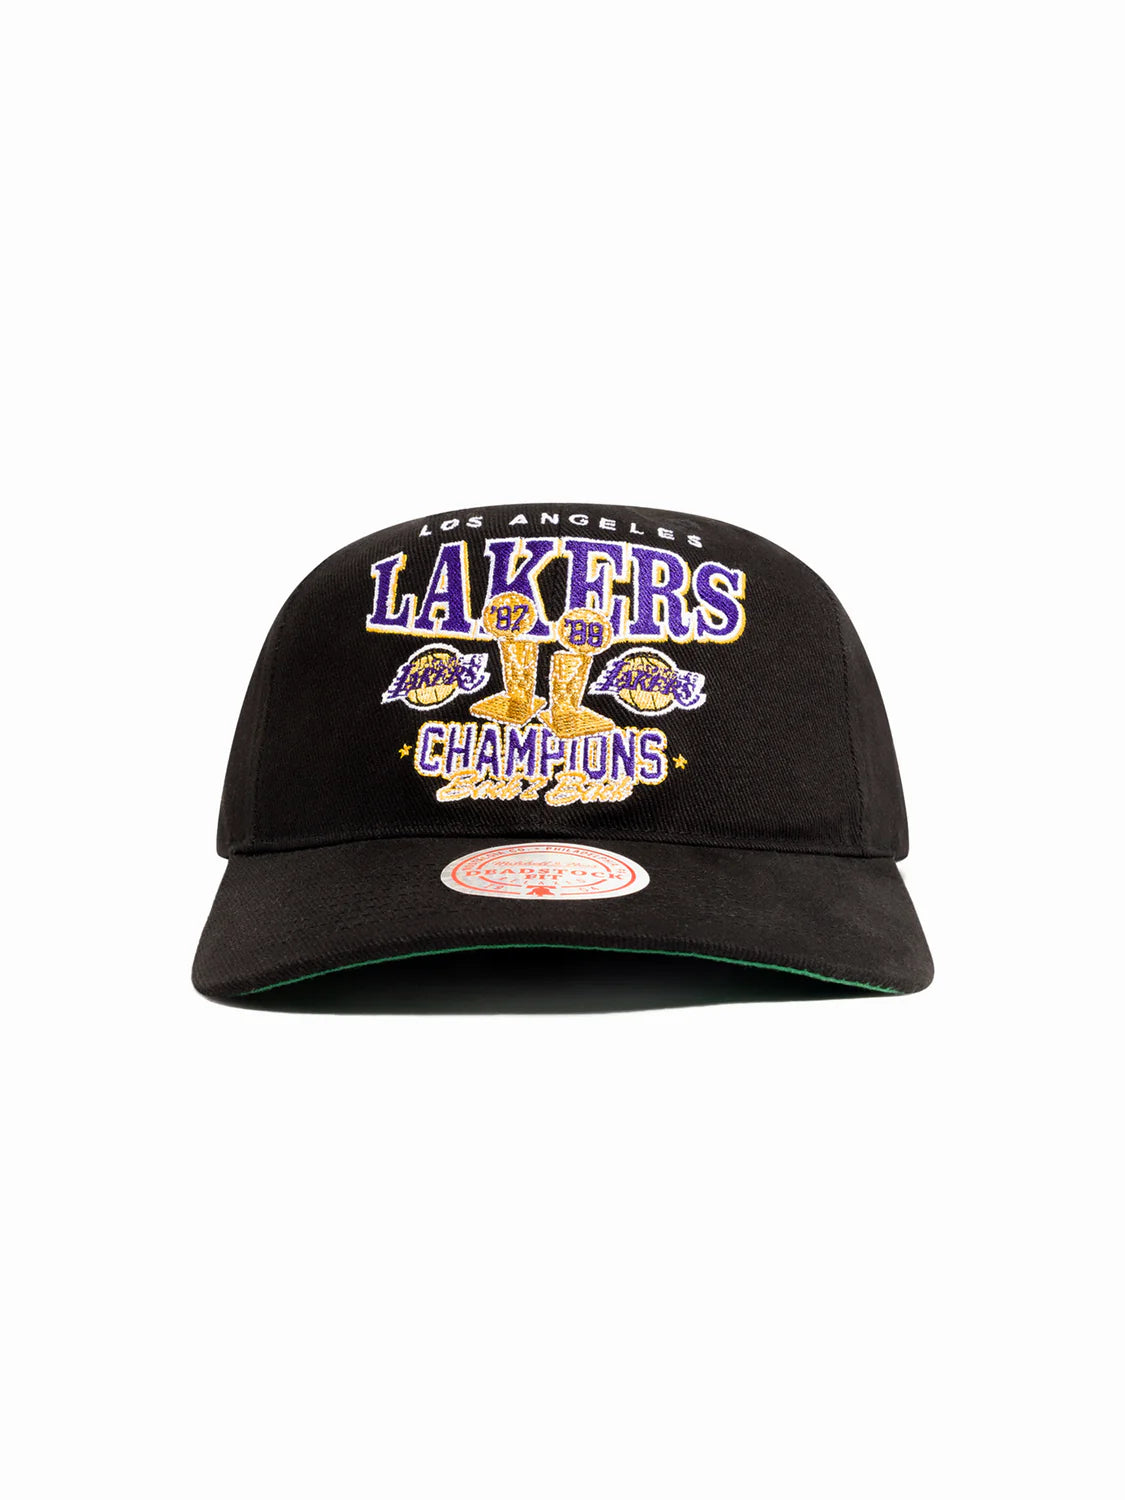 Mitchell and Ness Los Angeles Lakers Championship Trucker Snapback Hat Black